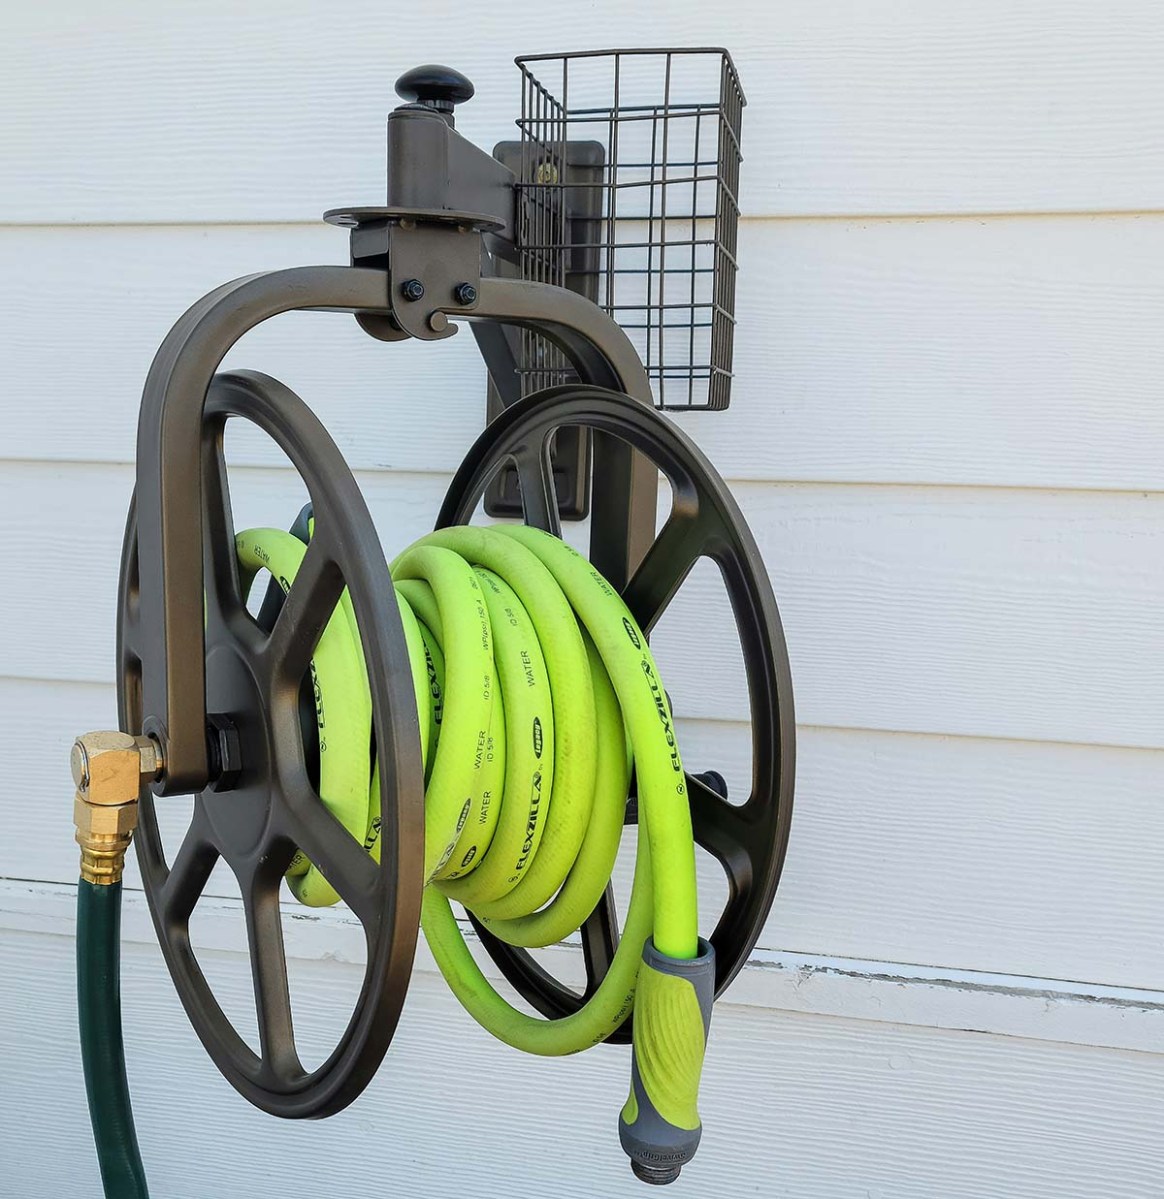 Bright yellow rubber hose wrapped around a mounted hose reel